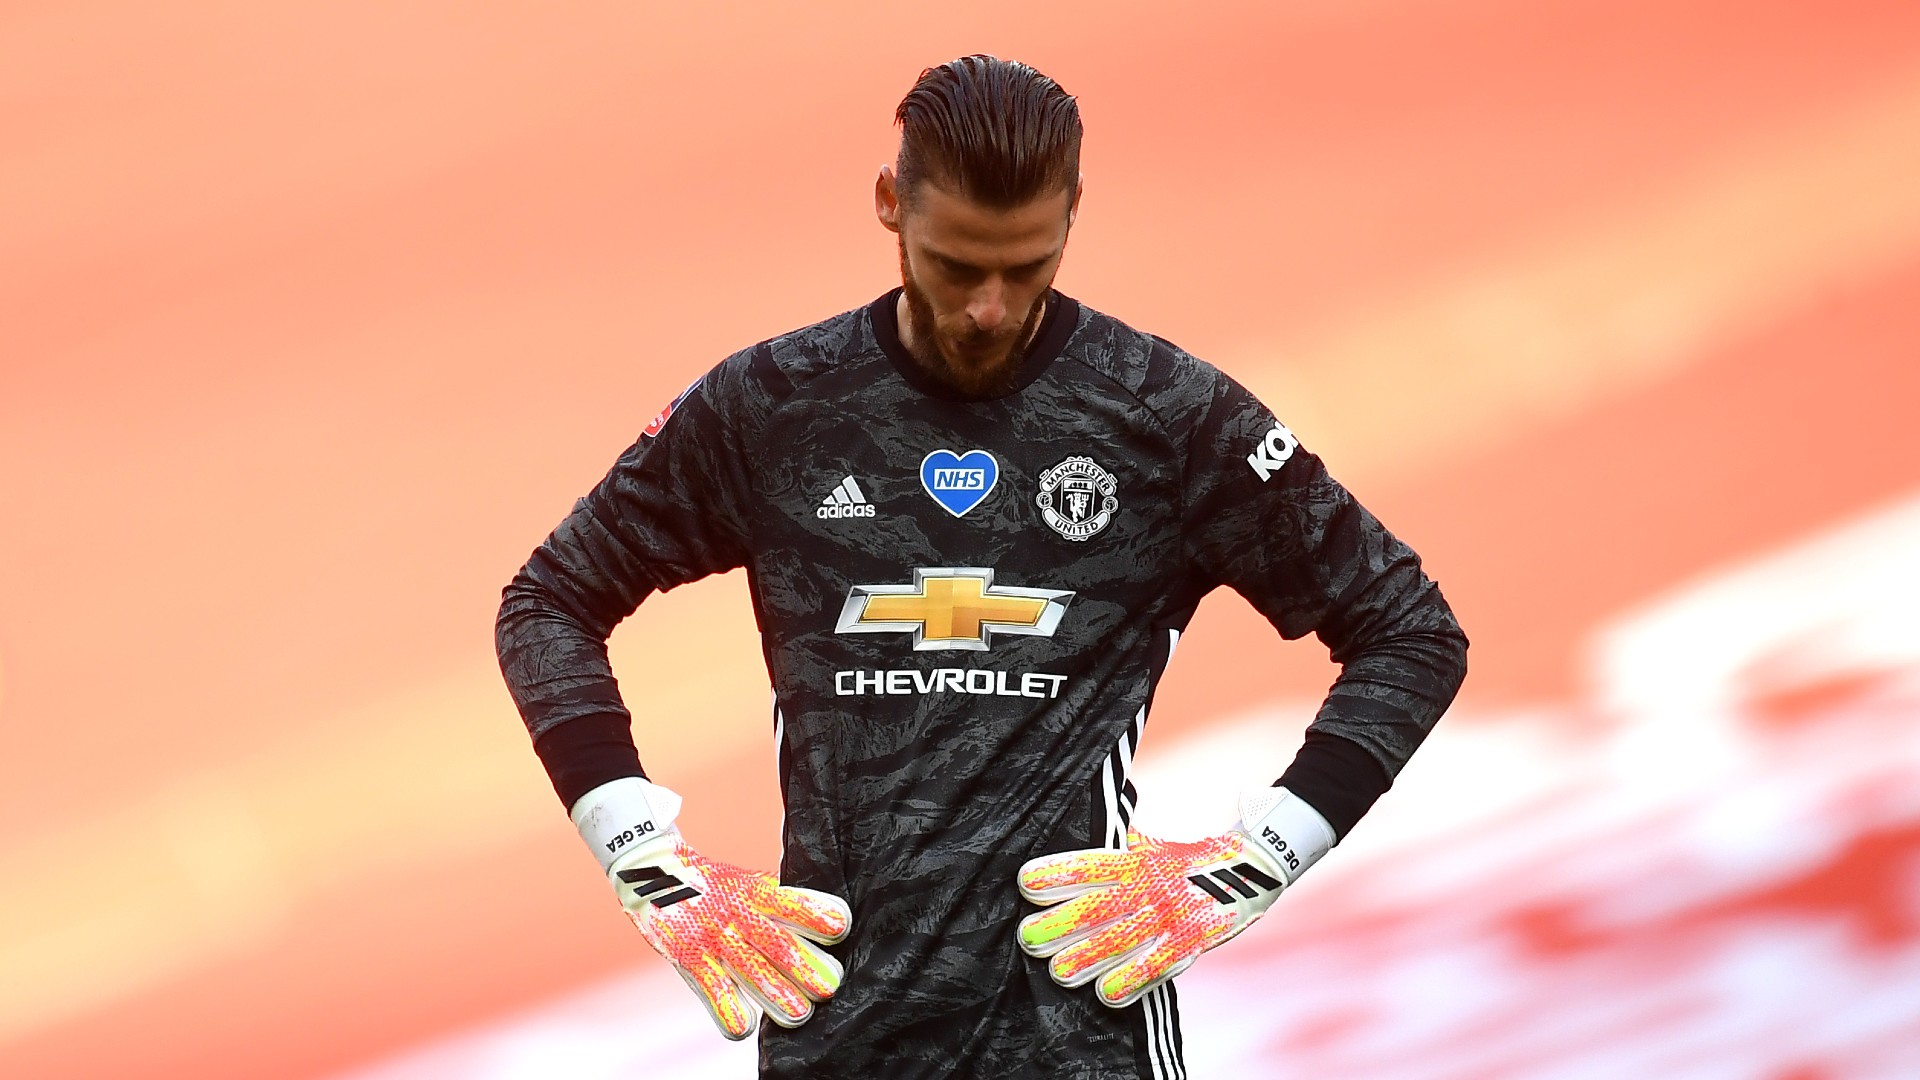 'De Gea is finished' - Manchester United goalkeeper slammed for FA Cup loss to Chelsea